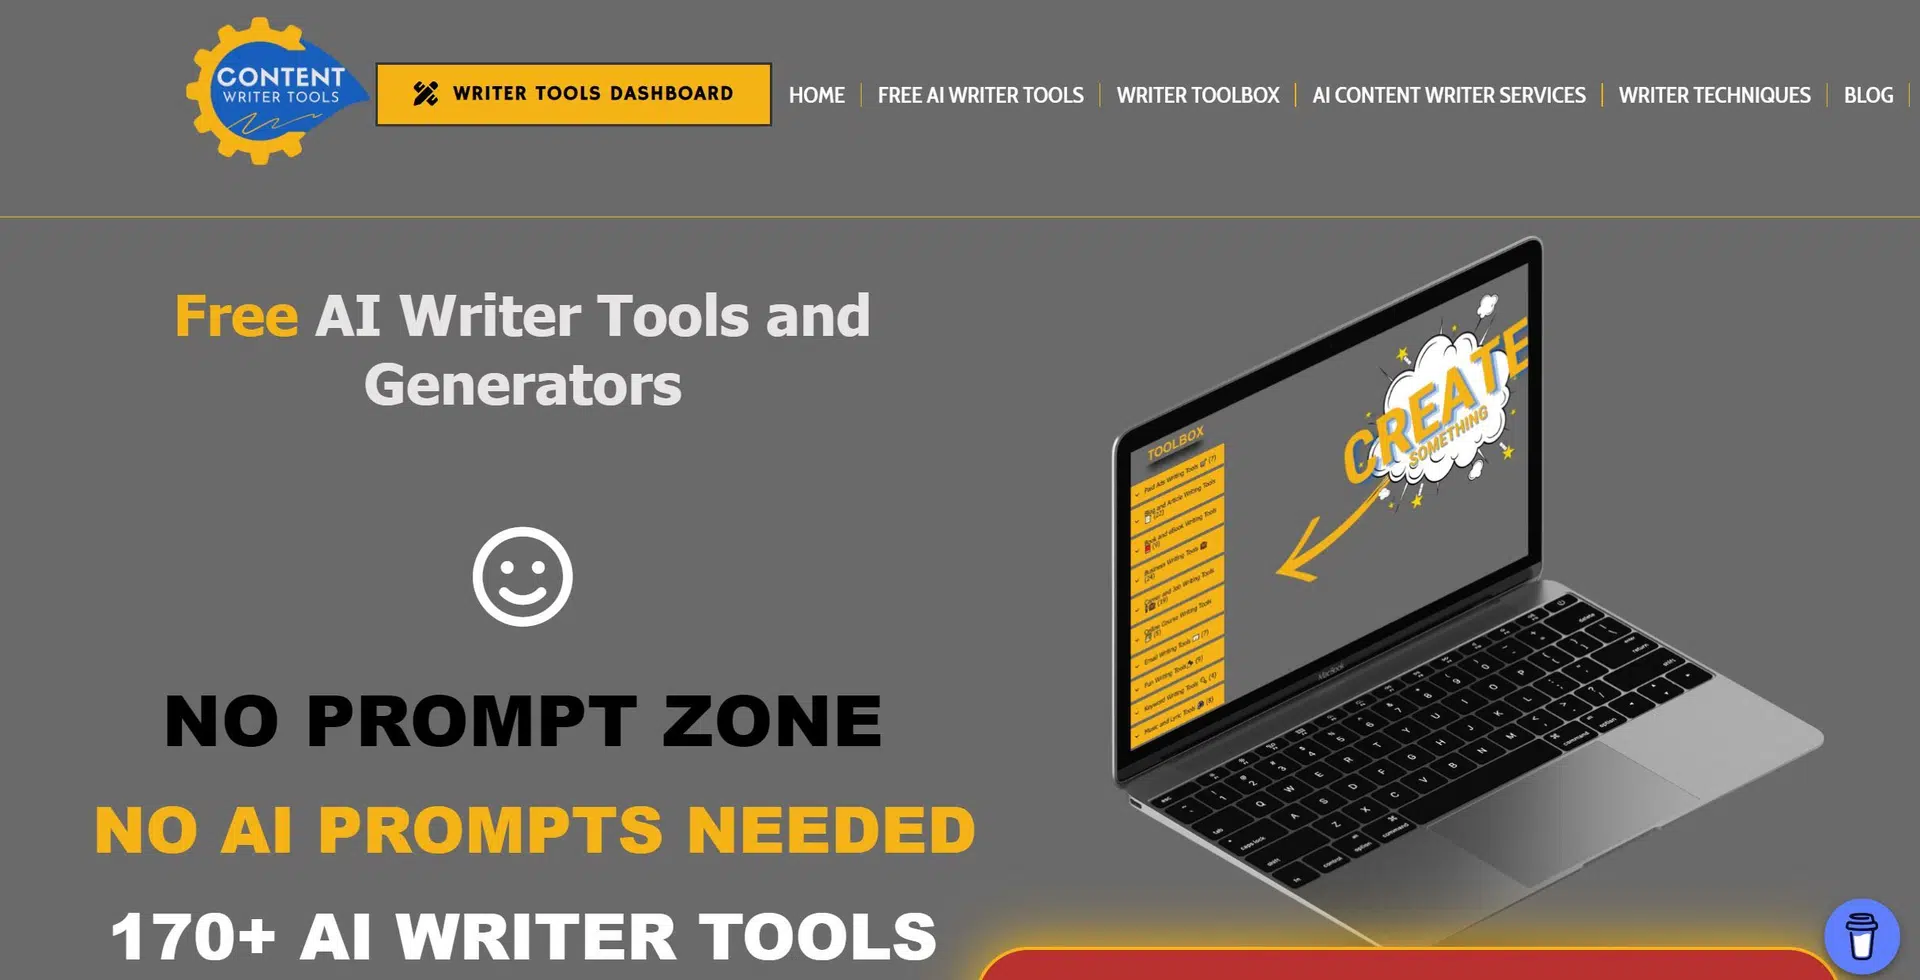 Content Writer Toolswebsite picture